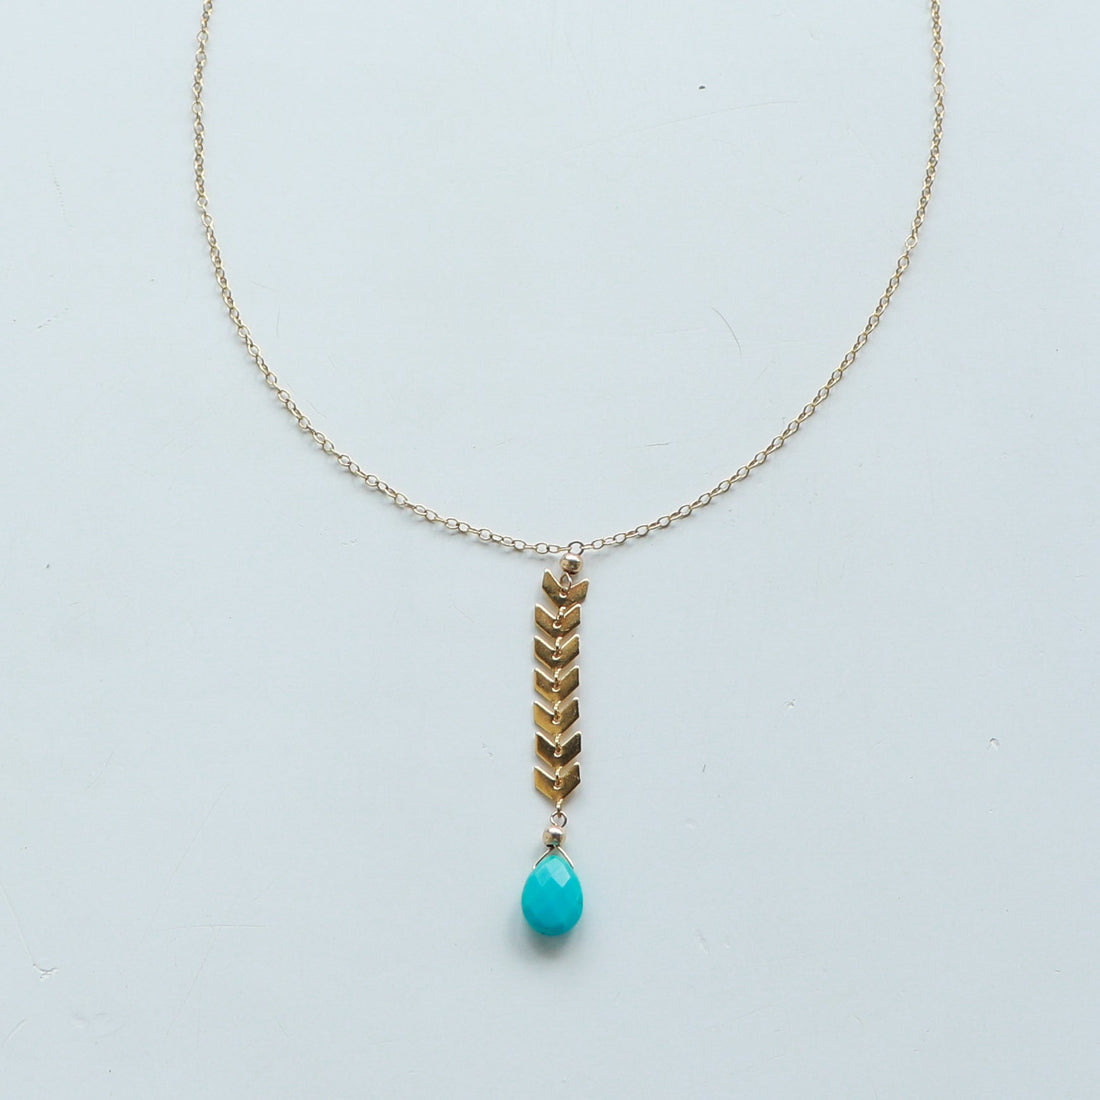 Turquoise Reef Necklaces in Gold Necklaces Sayulita Sol Jewelry 